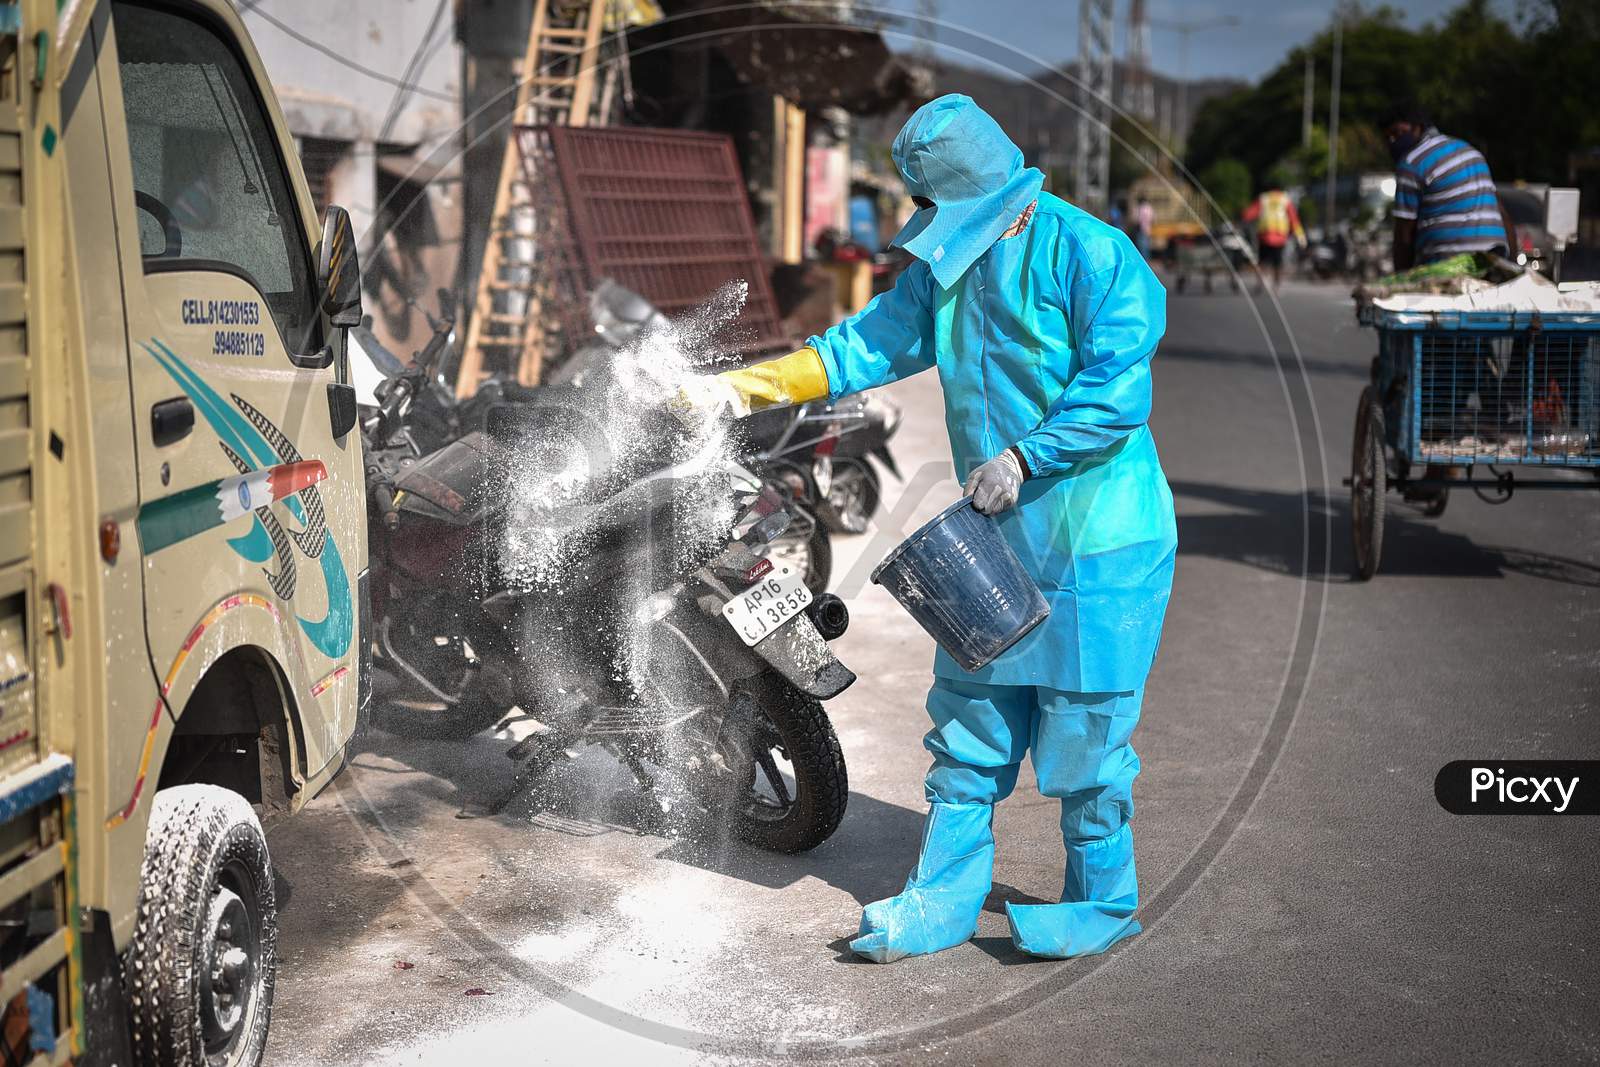 A Corporation Worker Wearing A Ppe Suit Throws Powdered Bleach At A Covid-19 Containment Area, During The Ongoing Coronavirus Lockdown, In Vijayawada.